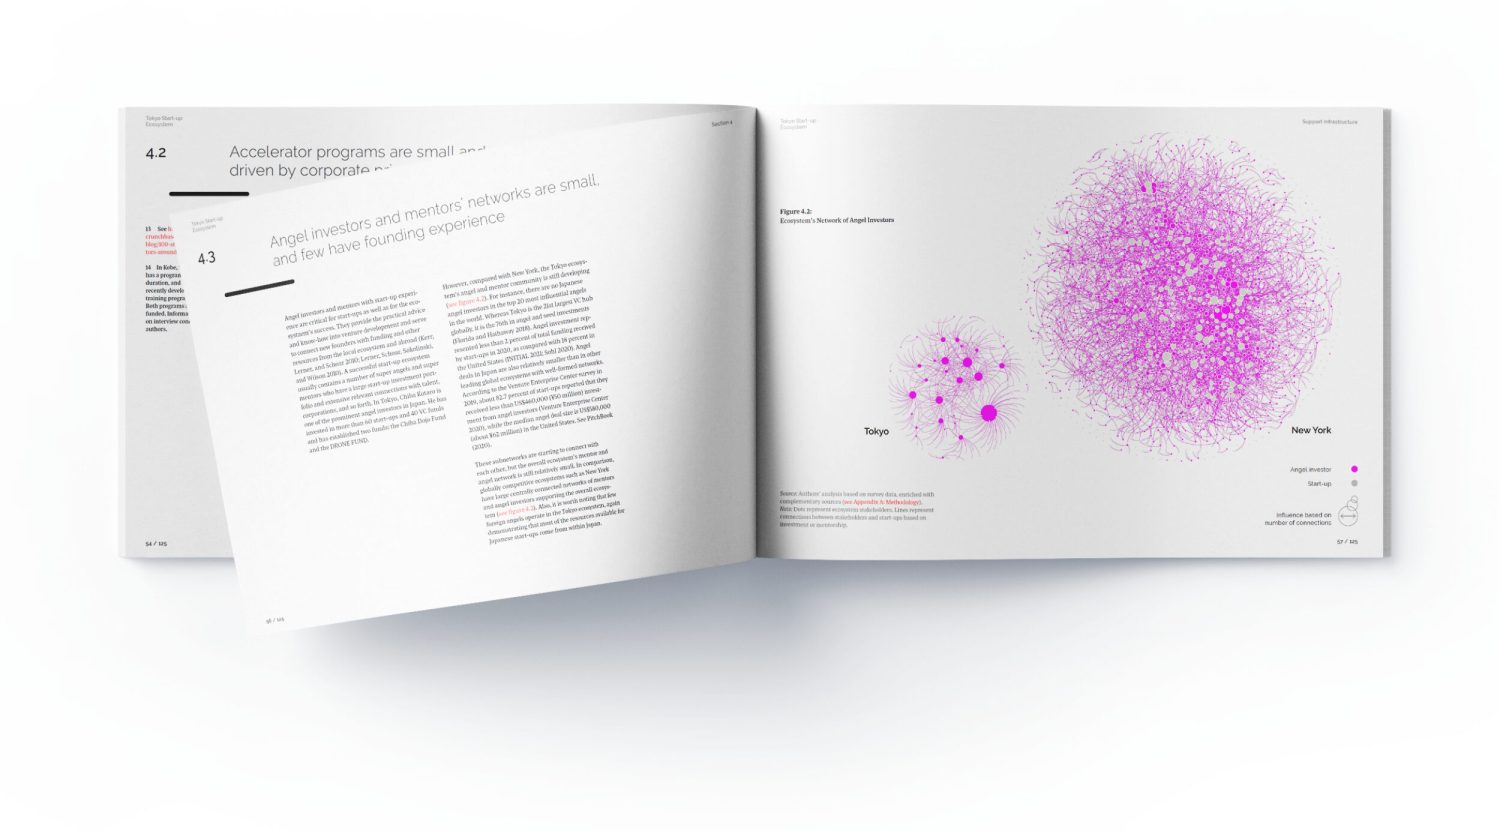 A double page of the report. On the left, a title followed by text divided into two columns. On the right, an example of the use of network graphs in the report. Two graphs are presented on the page, representing the startup ecosystems of Tokyo (smaller) and New York (larger). They are accompanied by a legend at the bottom right, and the data sources at the bottom left. The remaining space is exclusively dedicated to the graphs.